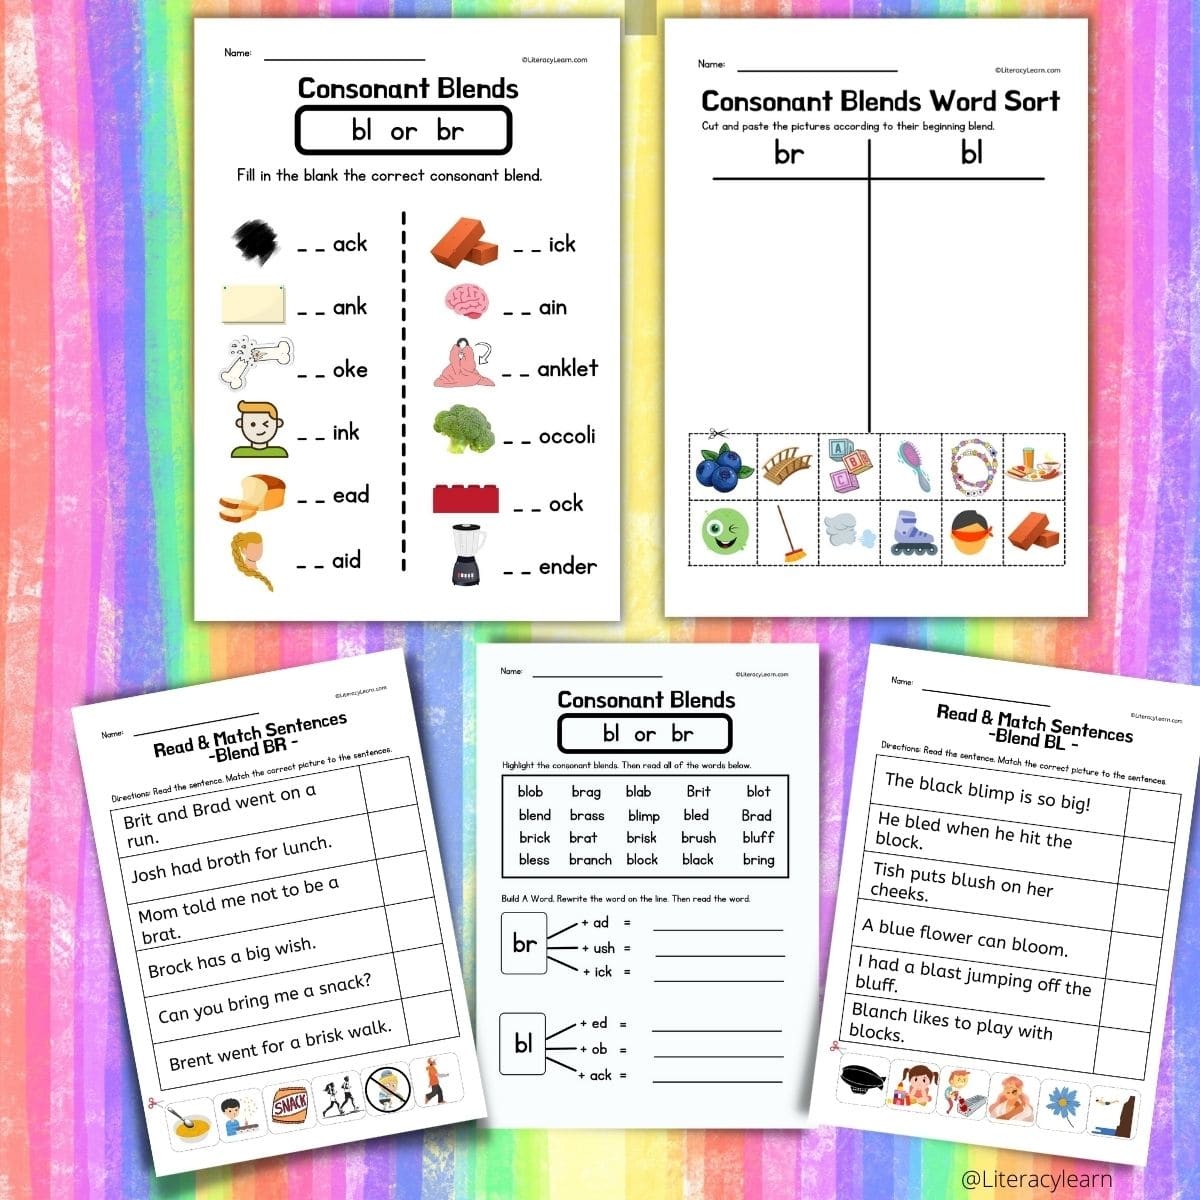 bl-and-br-blends-worksheets-activities-free-literacy-learn